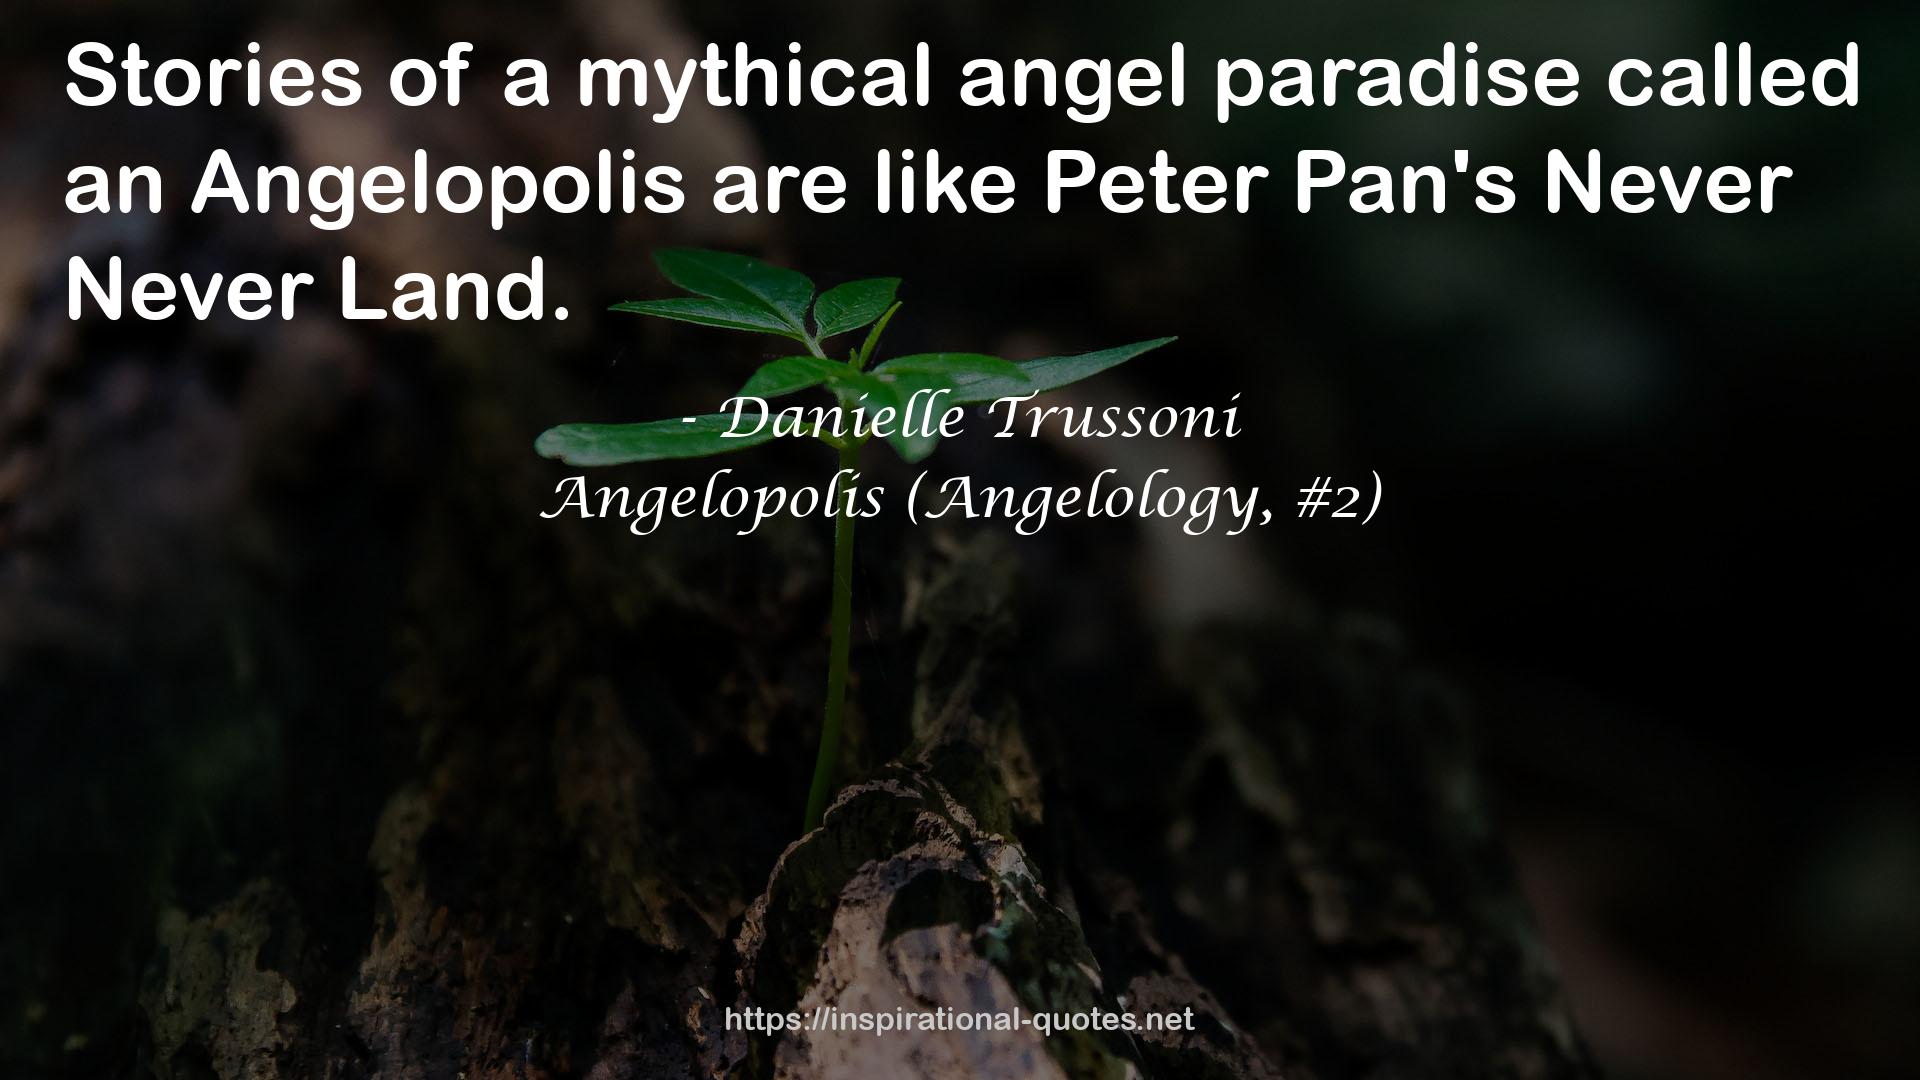 Angelopolis (Angelology, #2) QUOTES